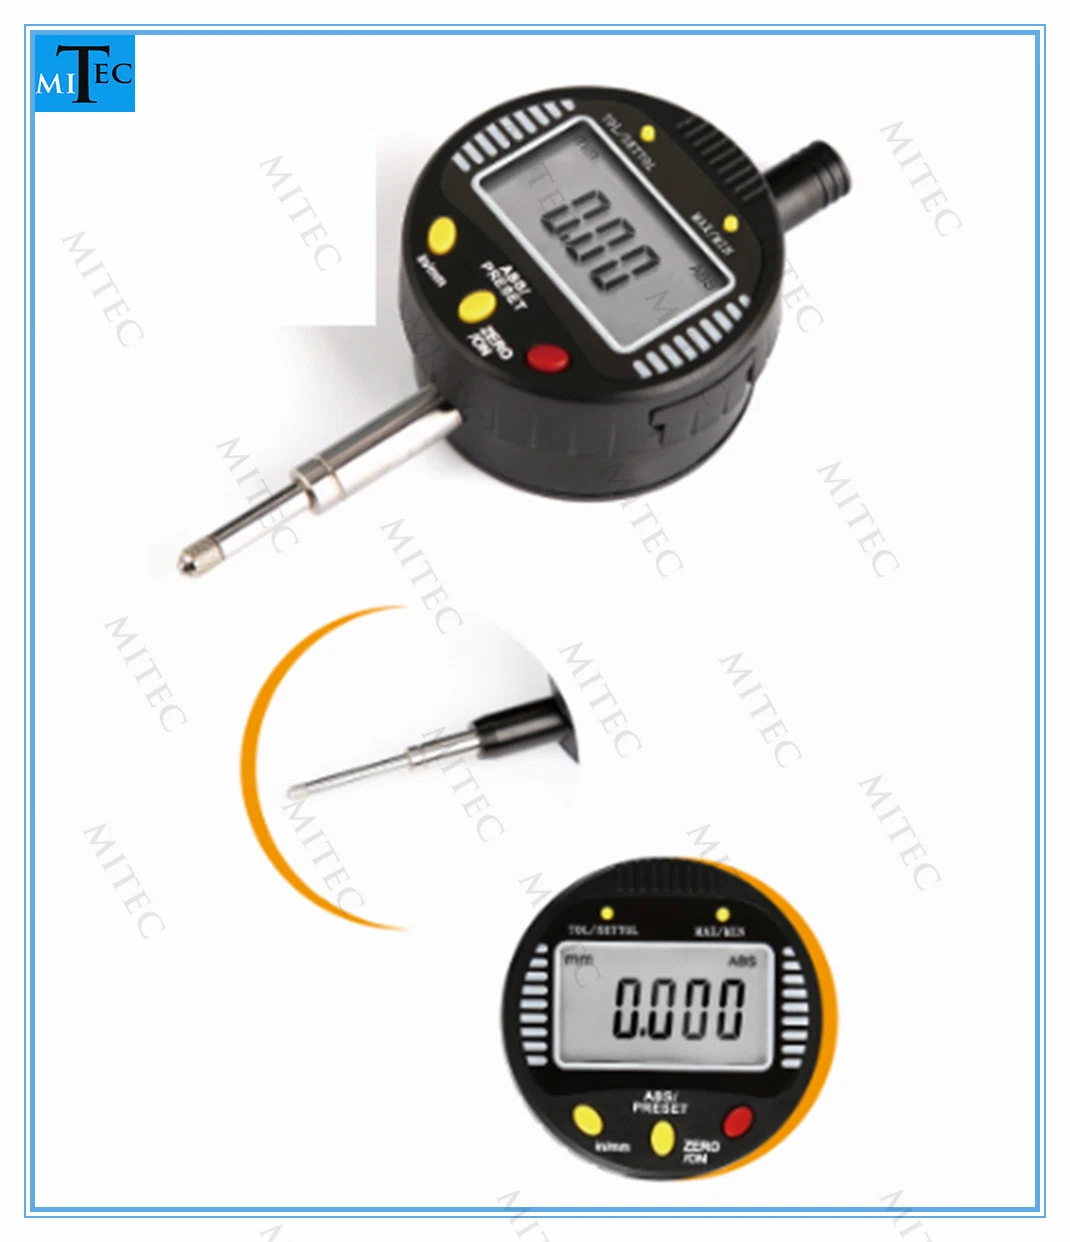 Wholesale Five Button Electronic Digital Dial Indicator 0-25mm 0.01/ 0.001